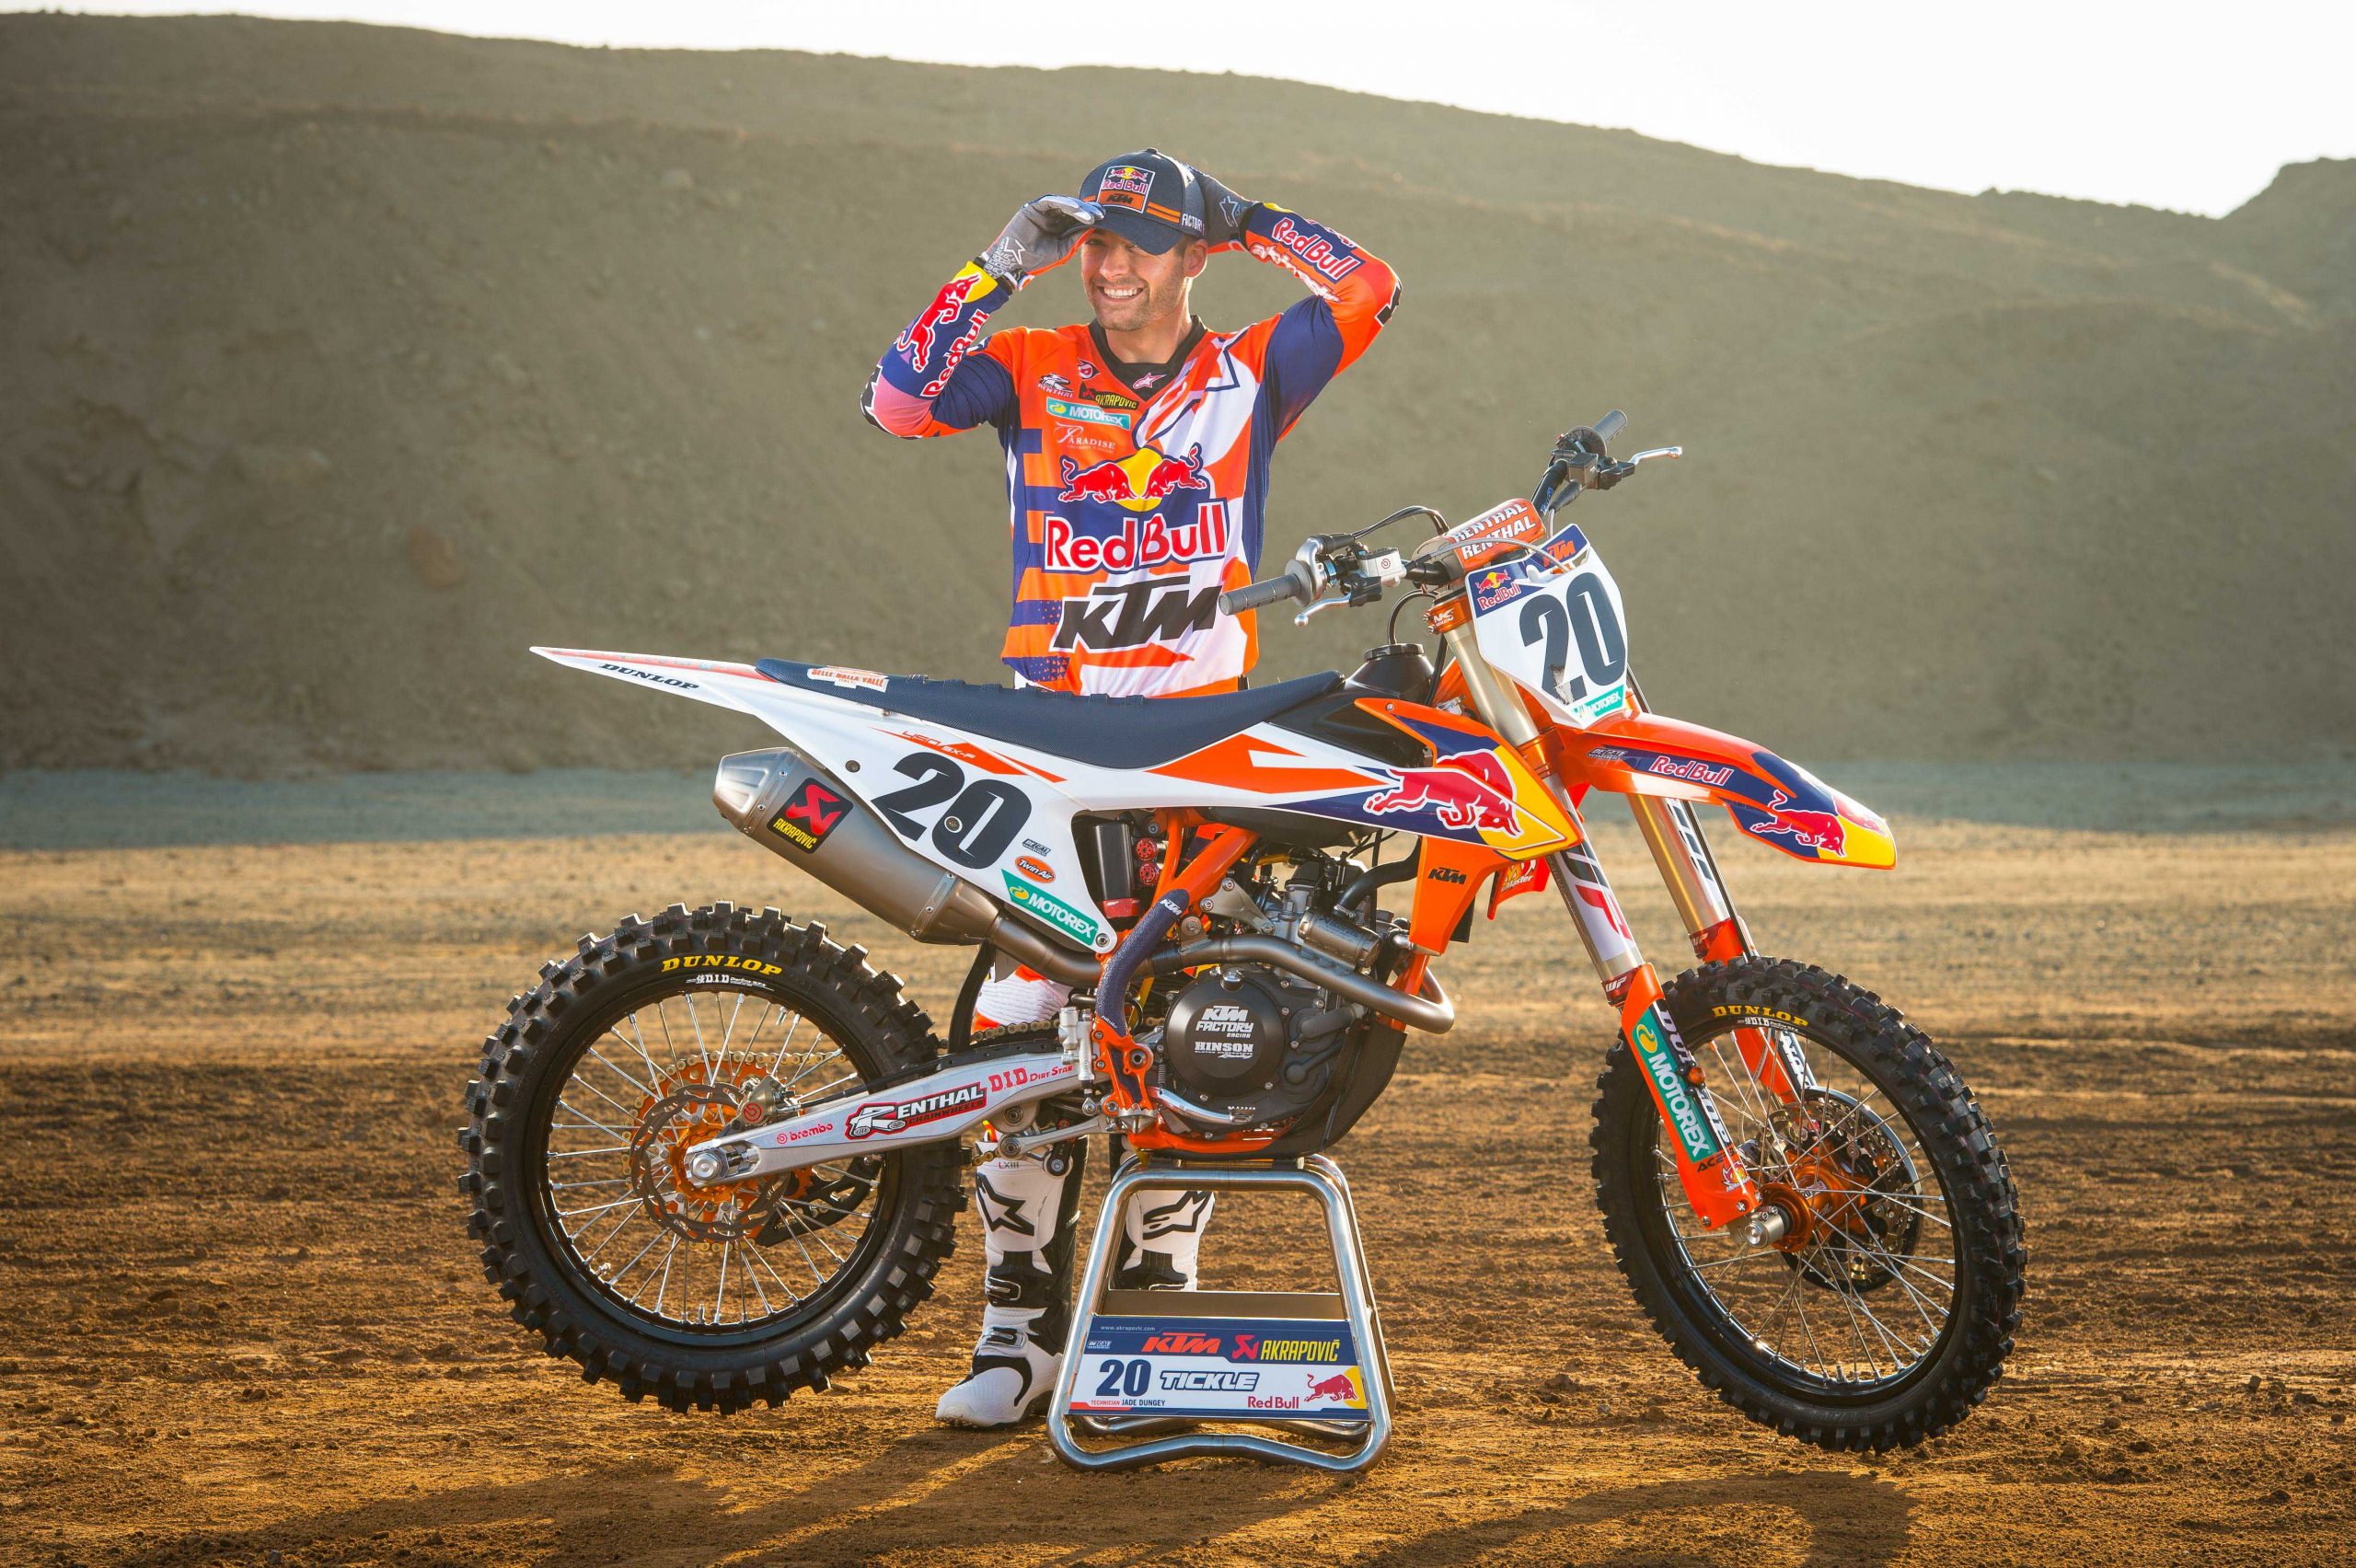 IN CONVERSATION WITH BROC TICKLE | Rust Sports